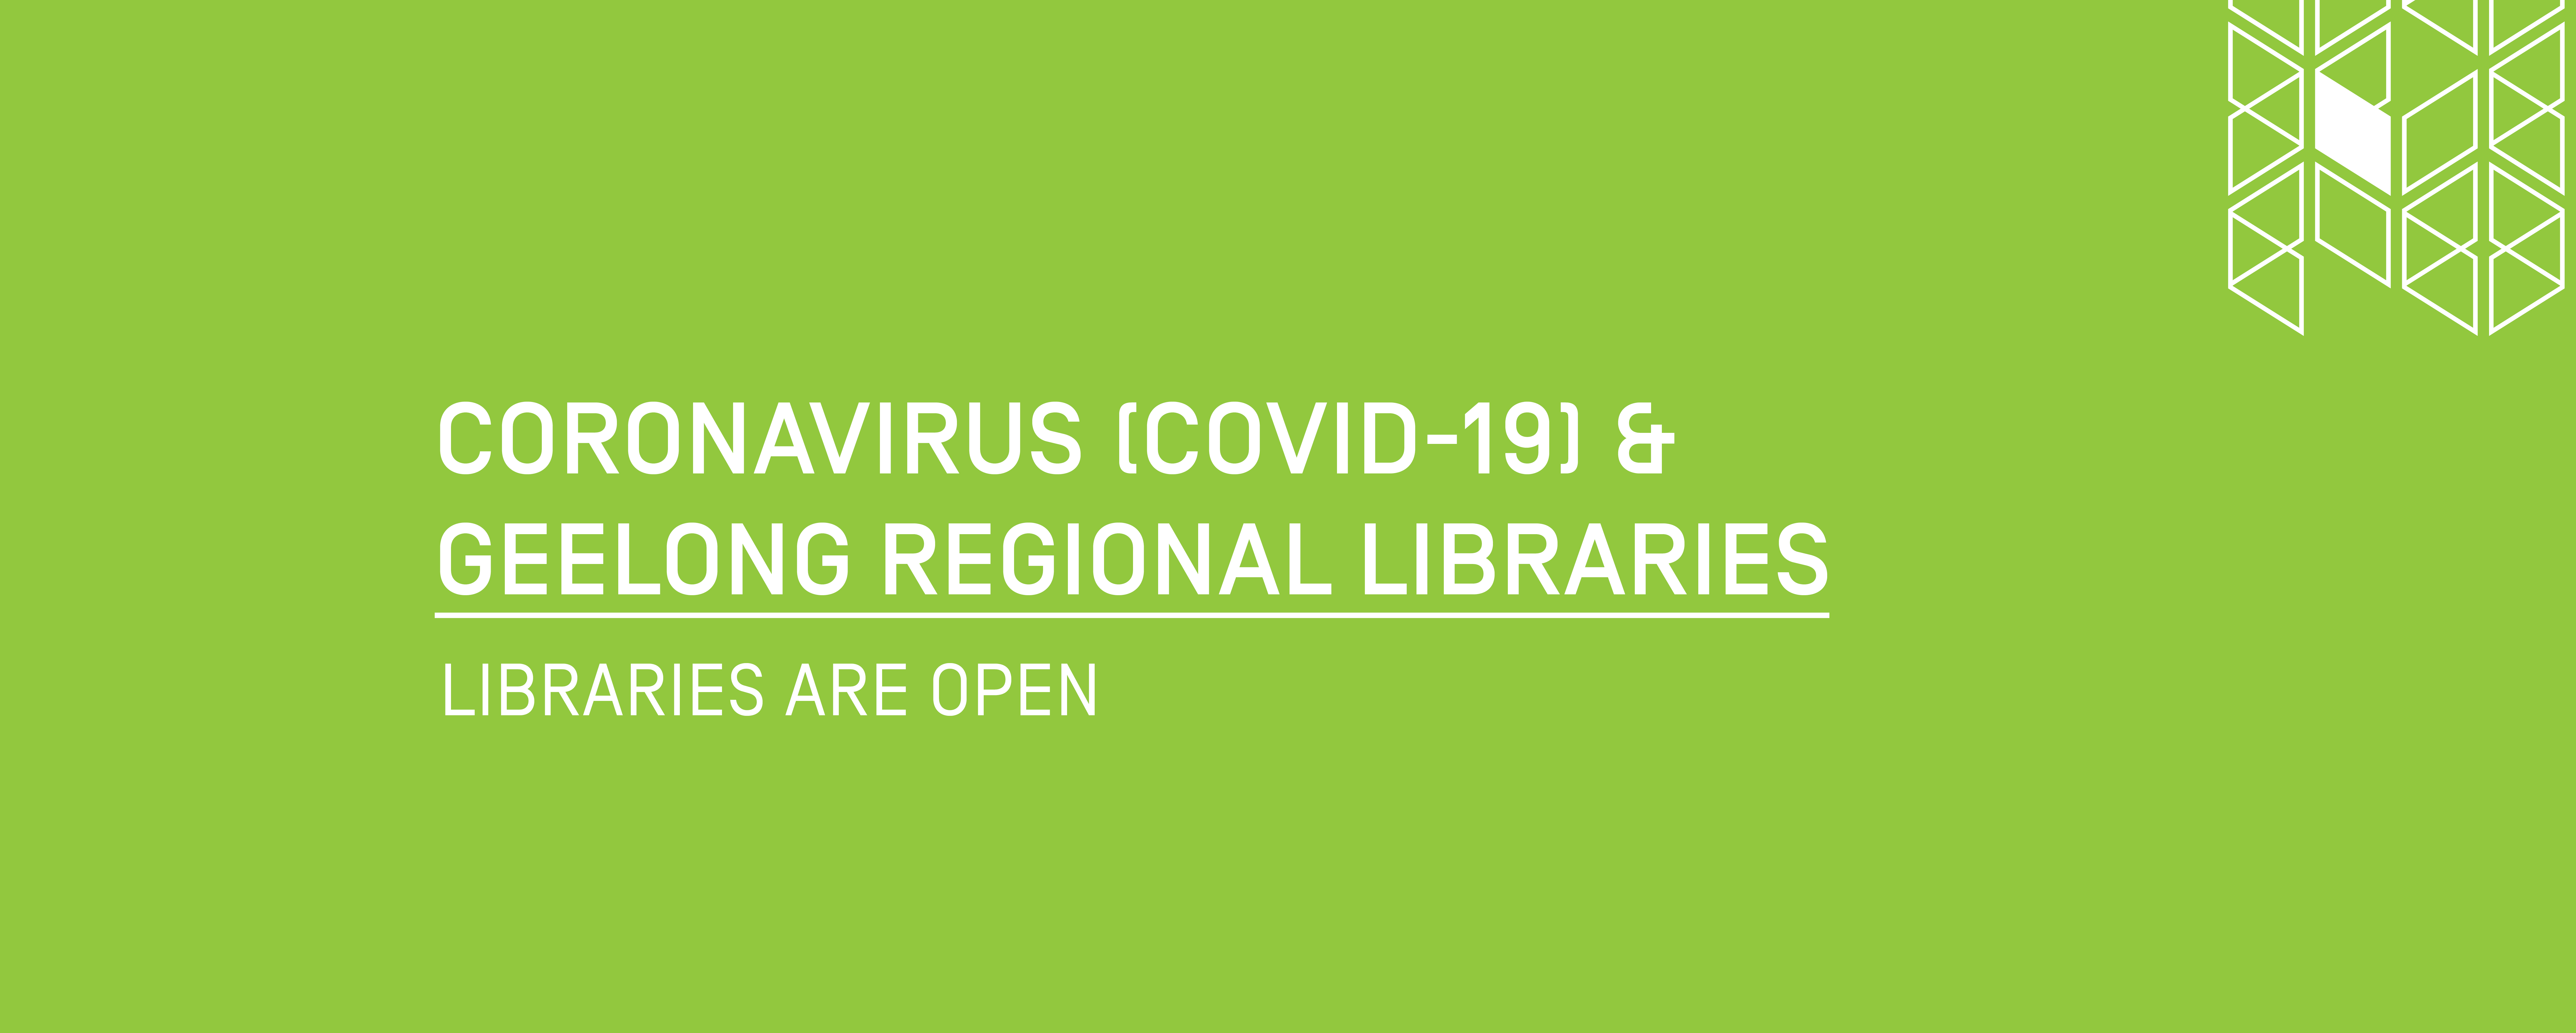 Green image with white text: Libraries now open